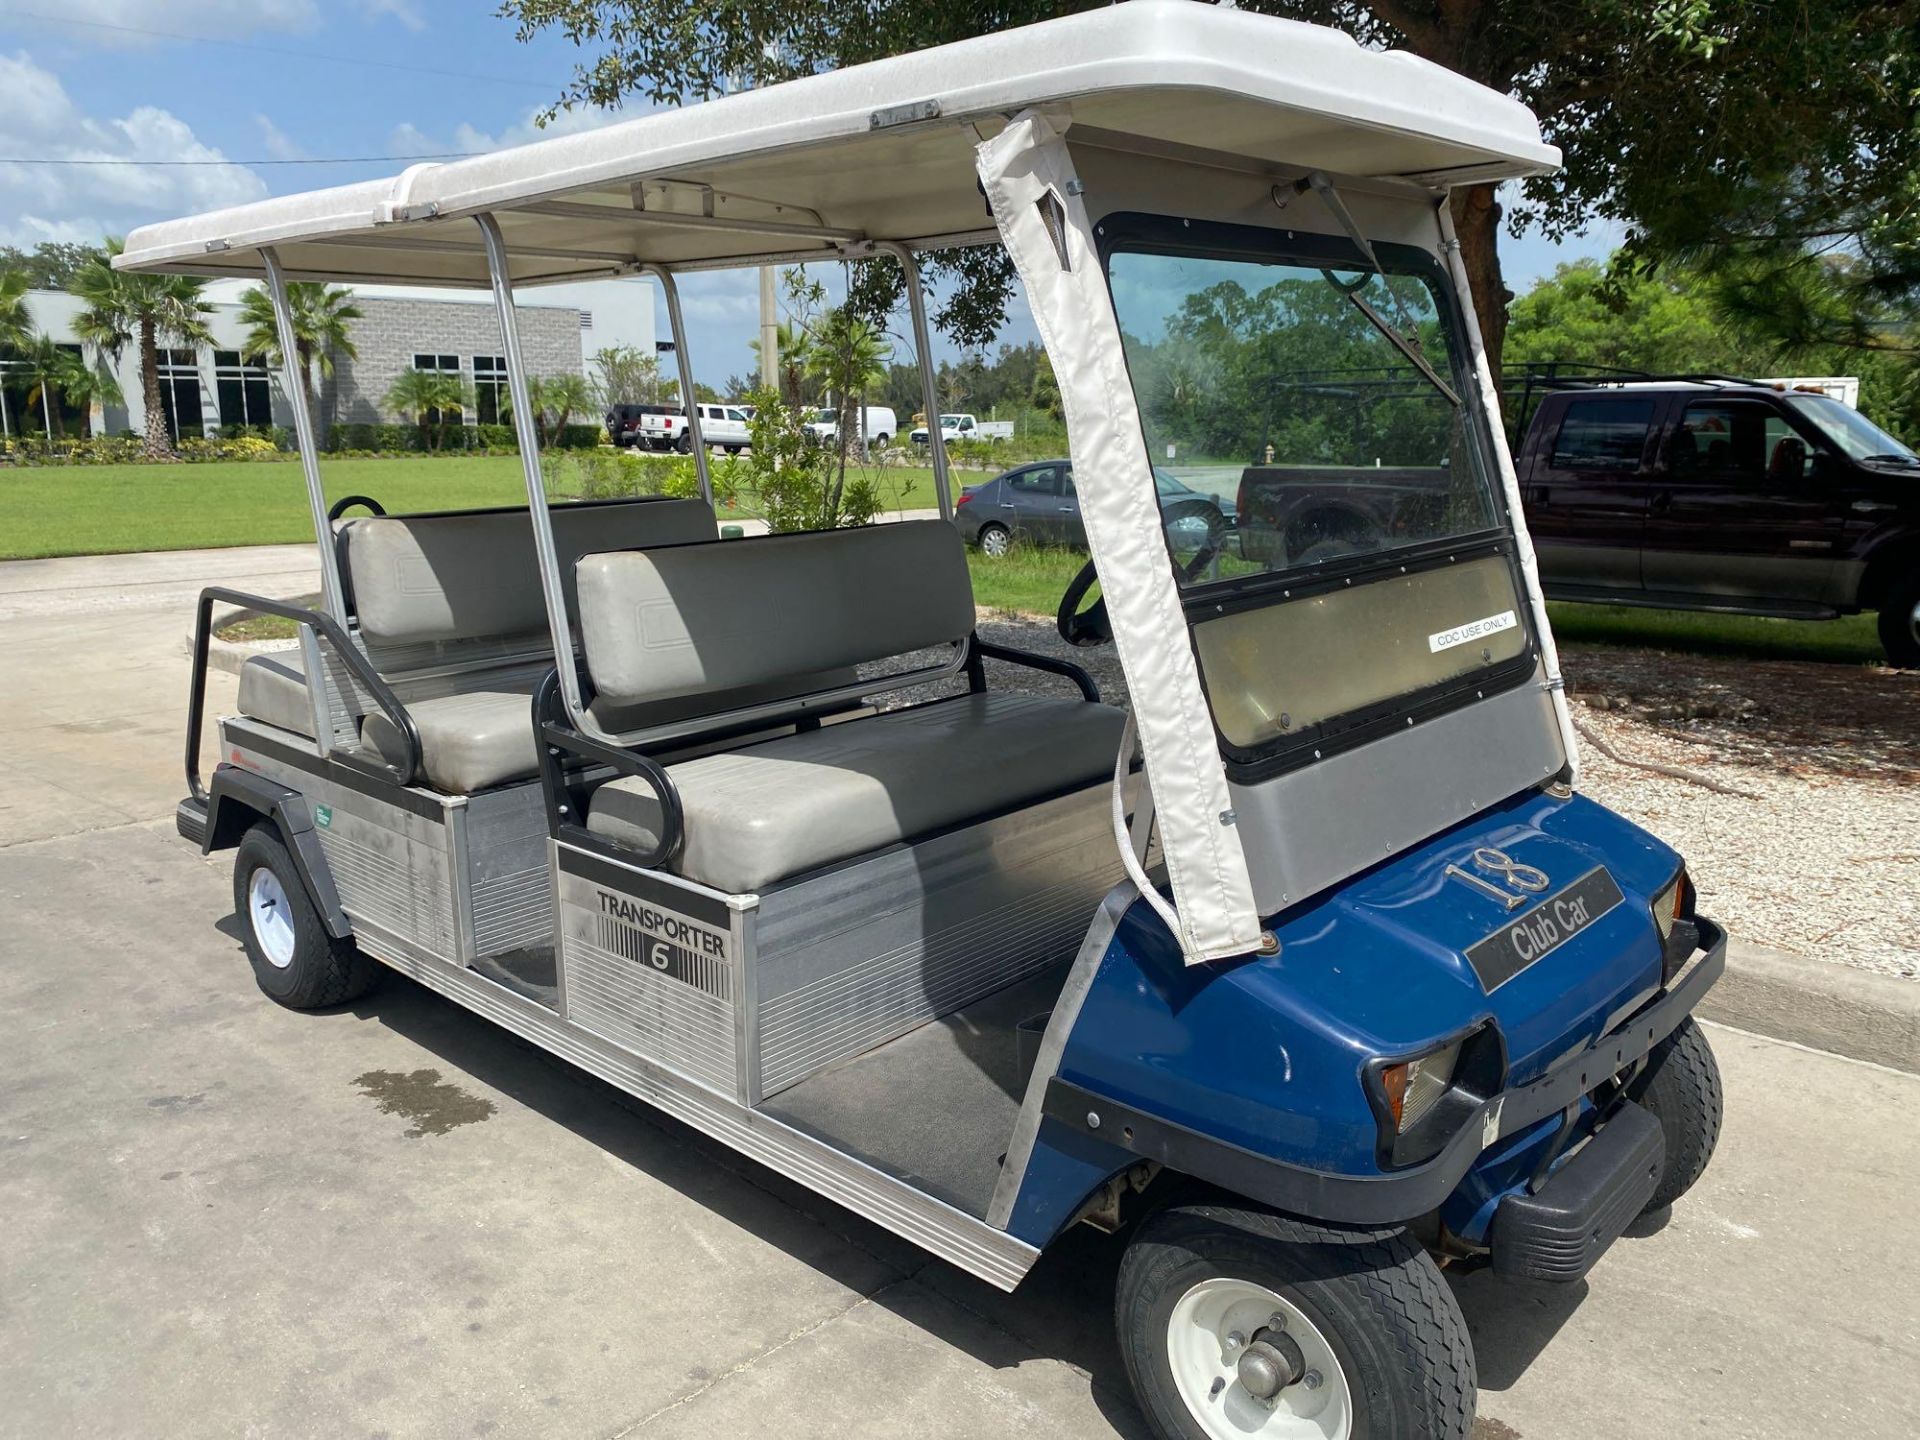 CLUB CAR TRANSPORTER 6 48V ELECTRIC GOLF CART, BUILT IN CHARGER, RUNS AND OPERATES